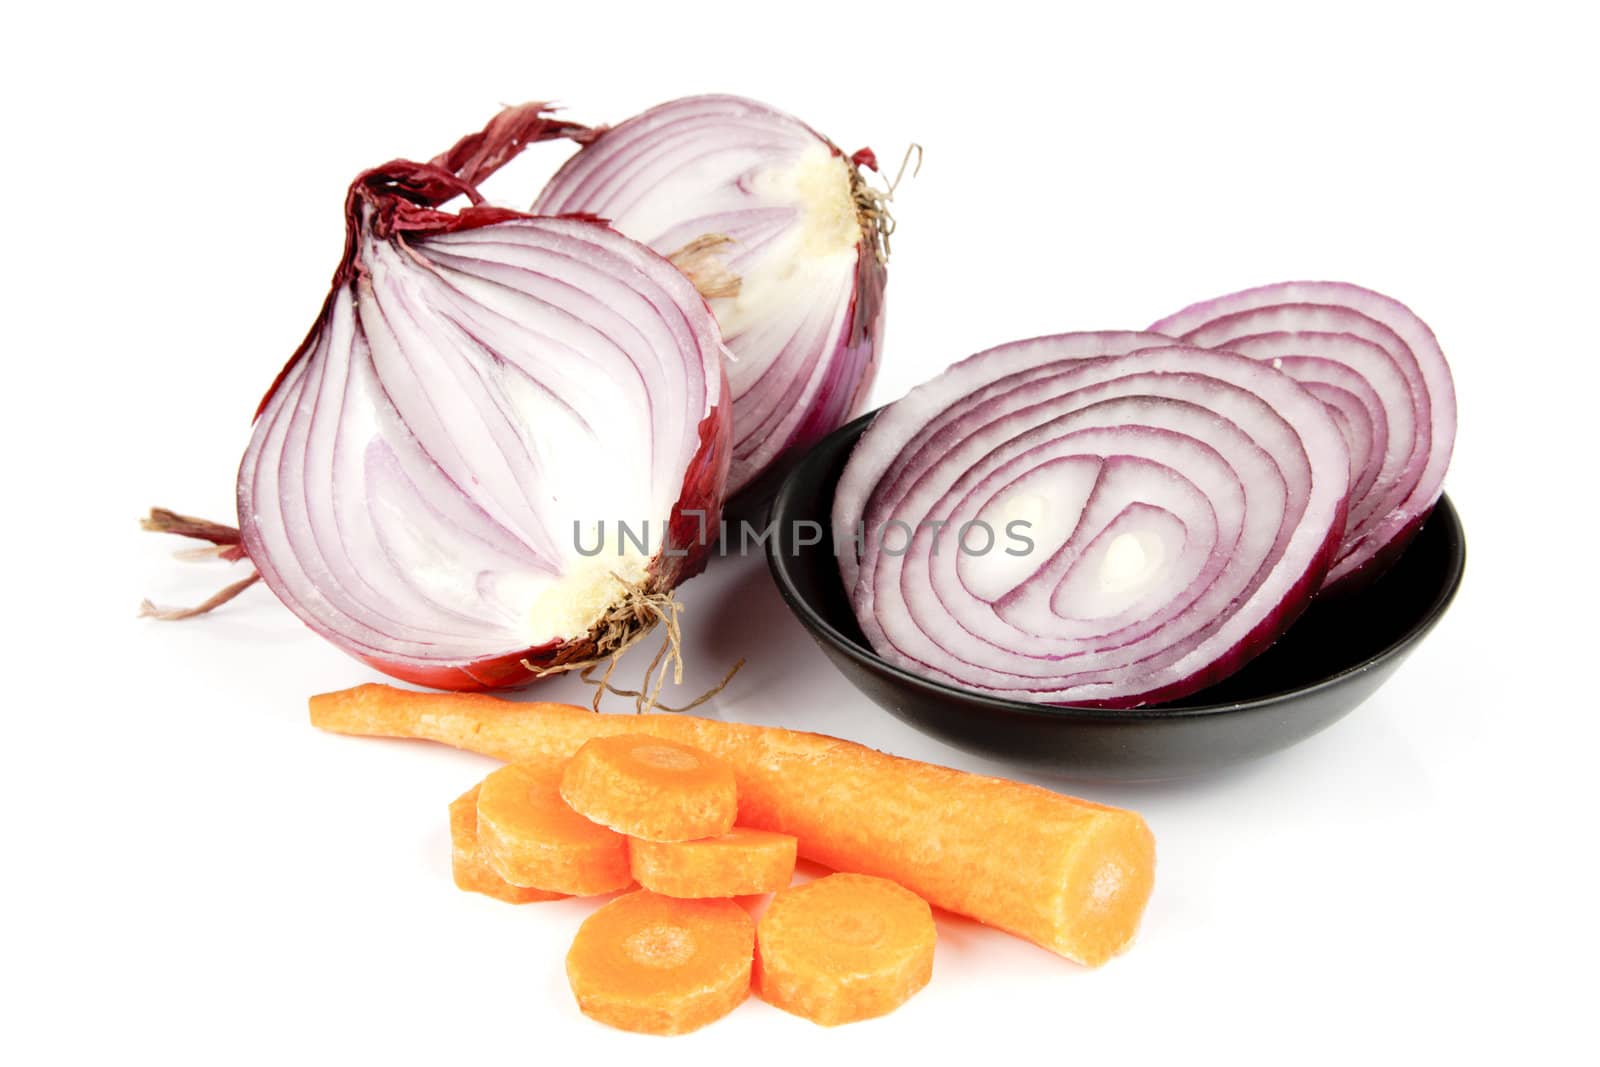 Raw red onion cut in half with slices in a dish and carrot on a reflective white background